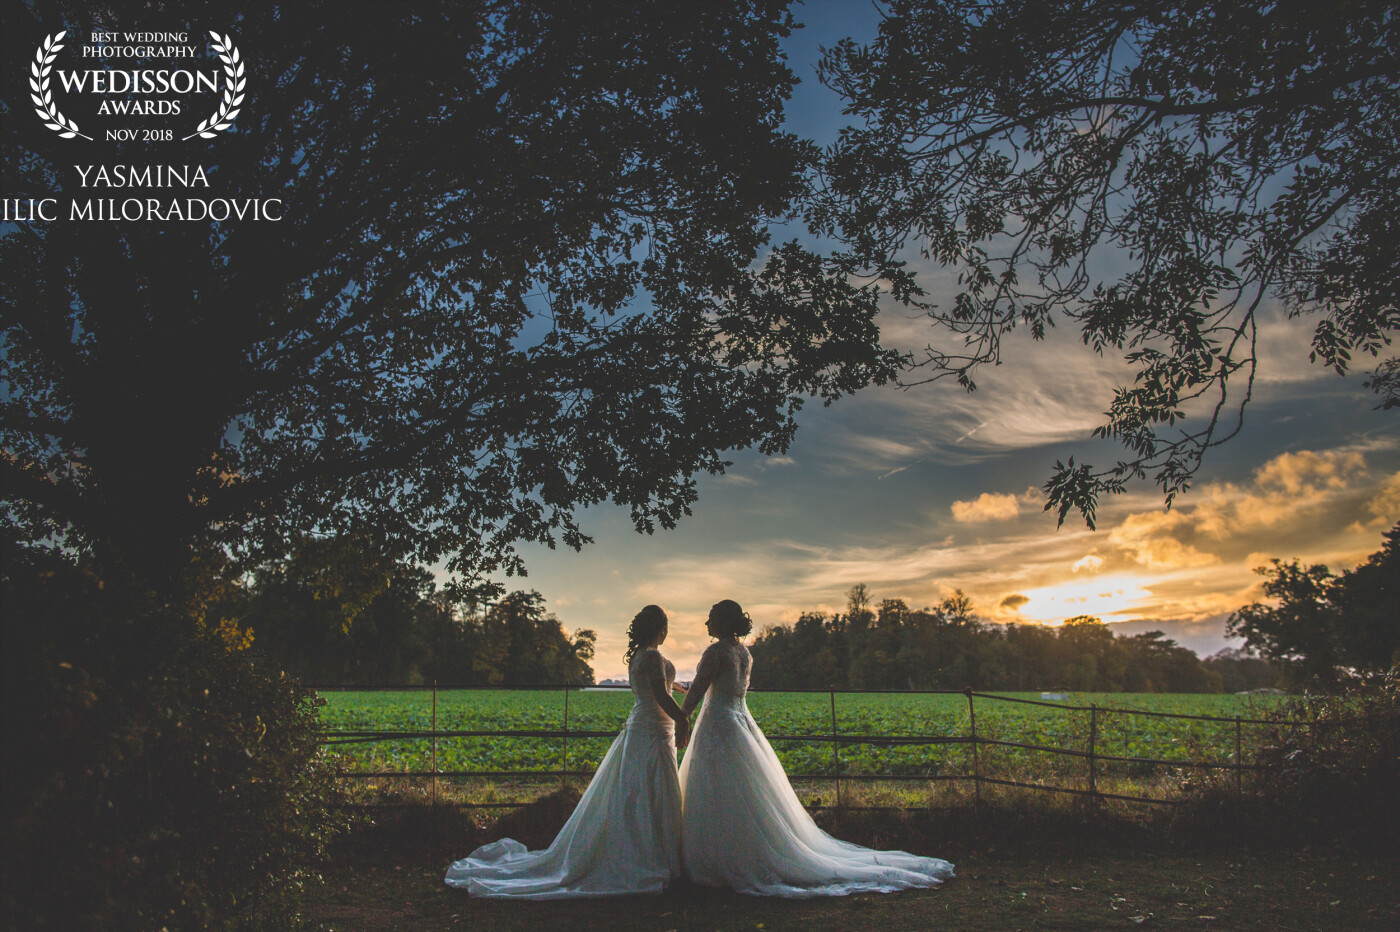 Just before I left Kellie and Stacey, I saw this stunning setting. I asked them to take a walk toward the field and here, they stopped... it was a beautiful moment.